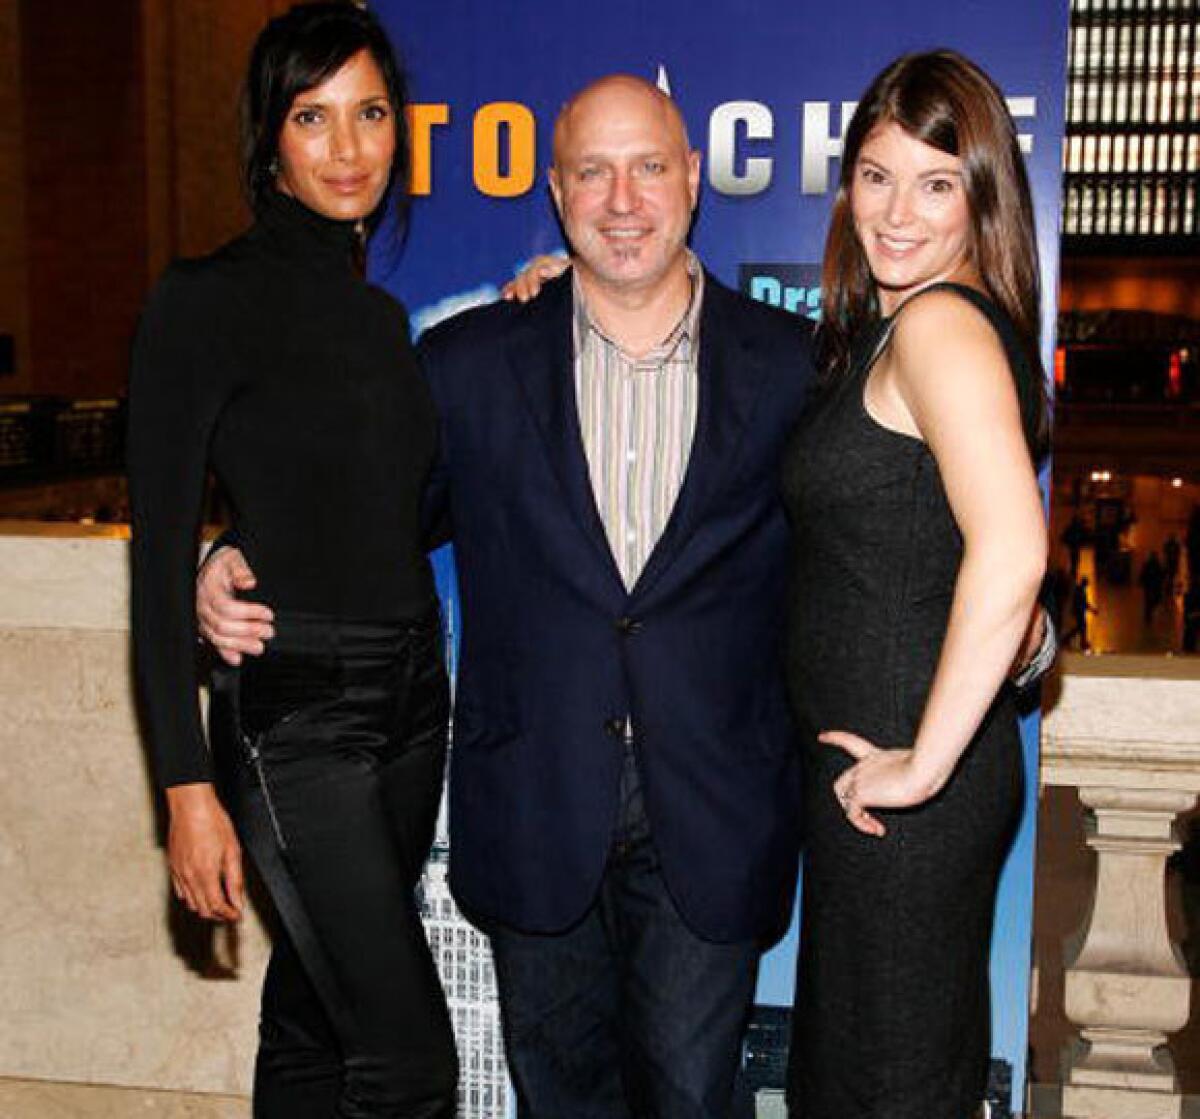 From left, "Top Chef" host Padma Lakshmi, head judge Tom Colicchio and judge Gail Simmons.